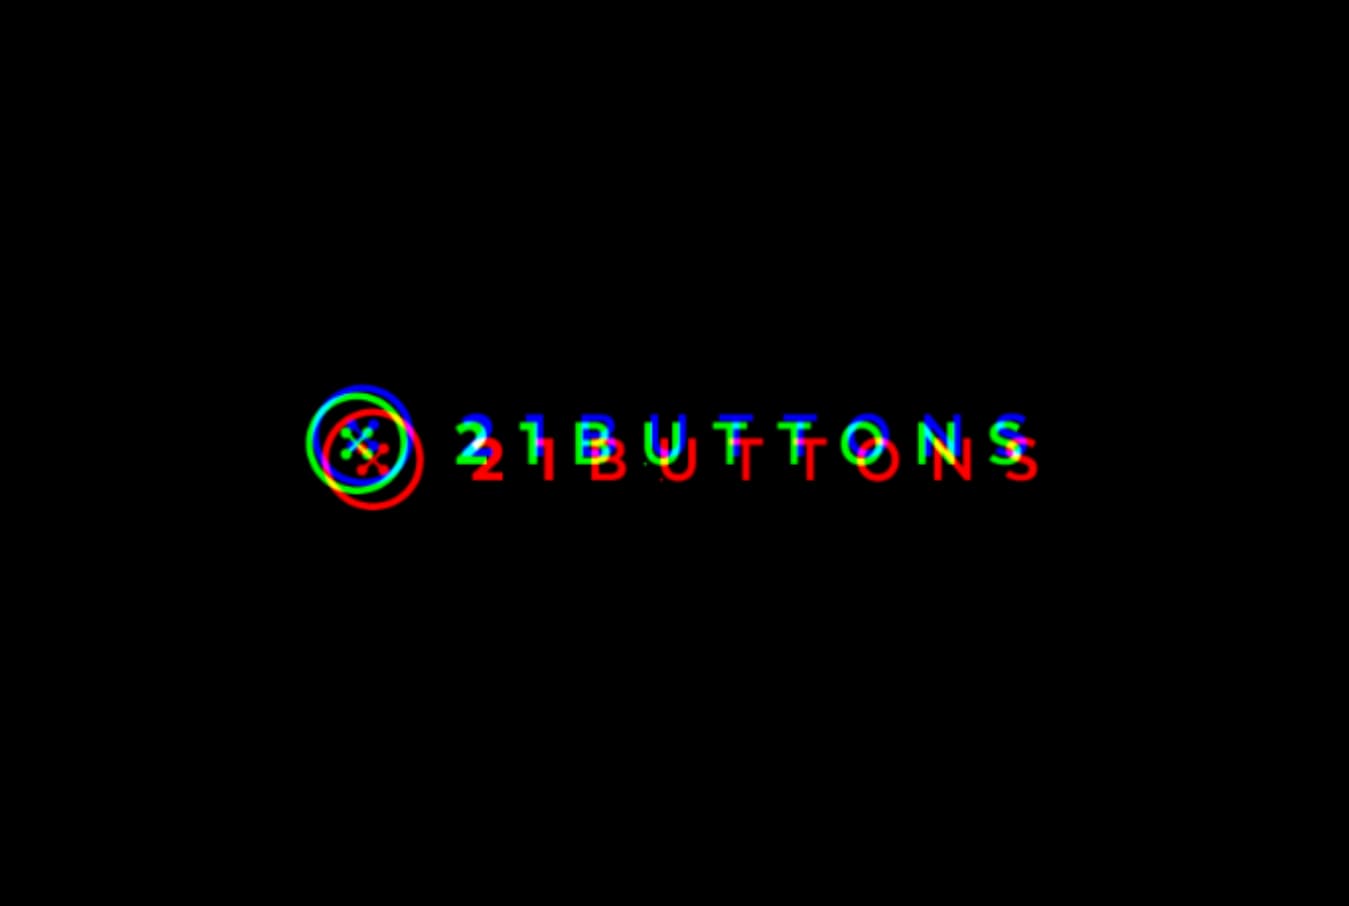 Fashion marketplace giant 21 Buttons exposes millions of users' data